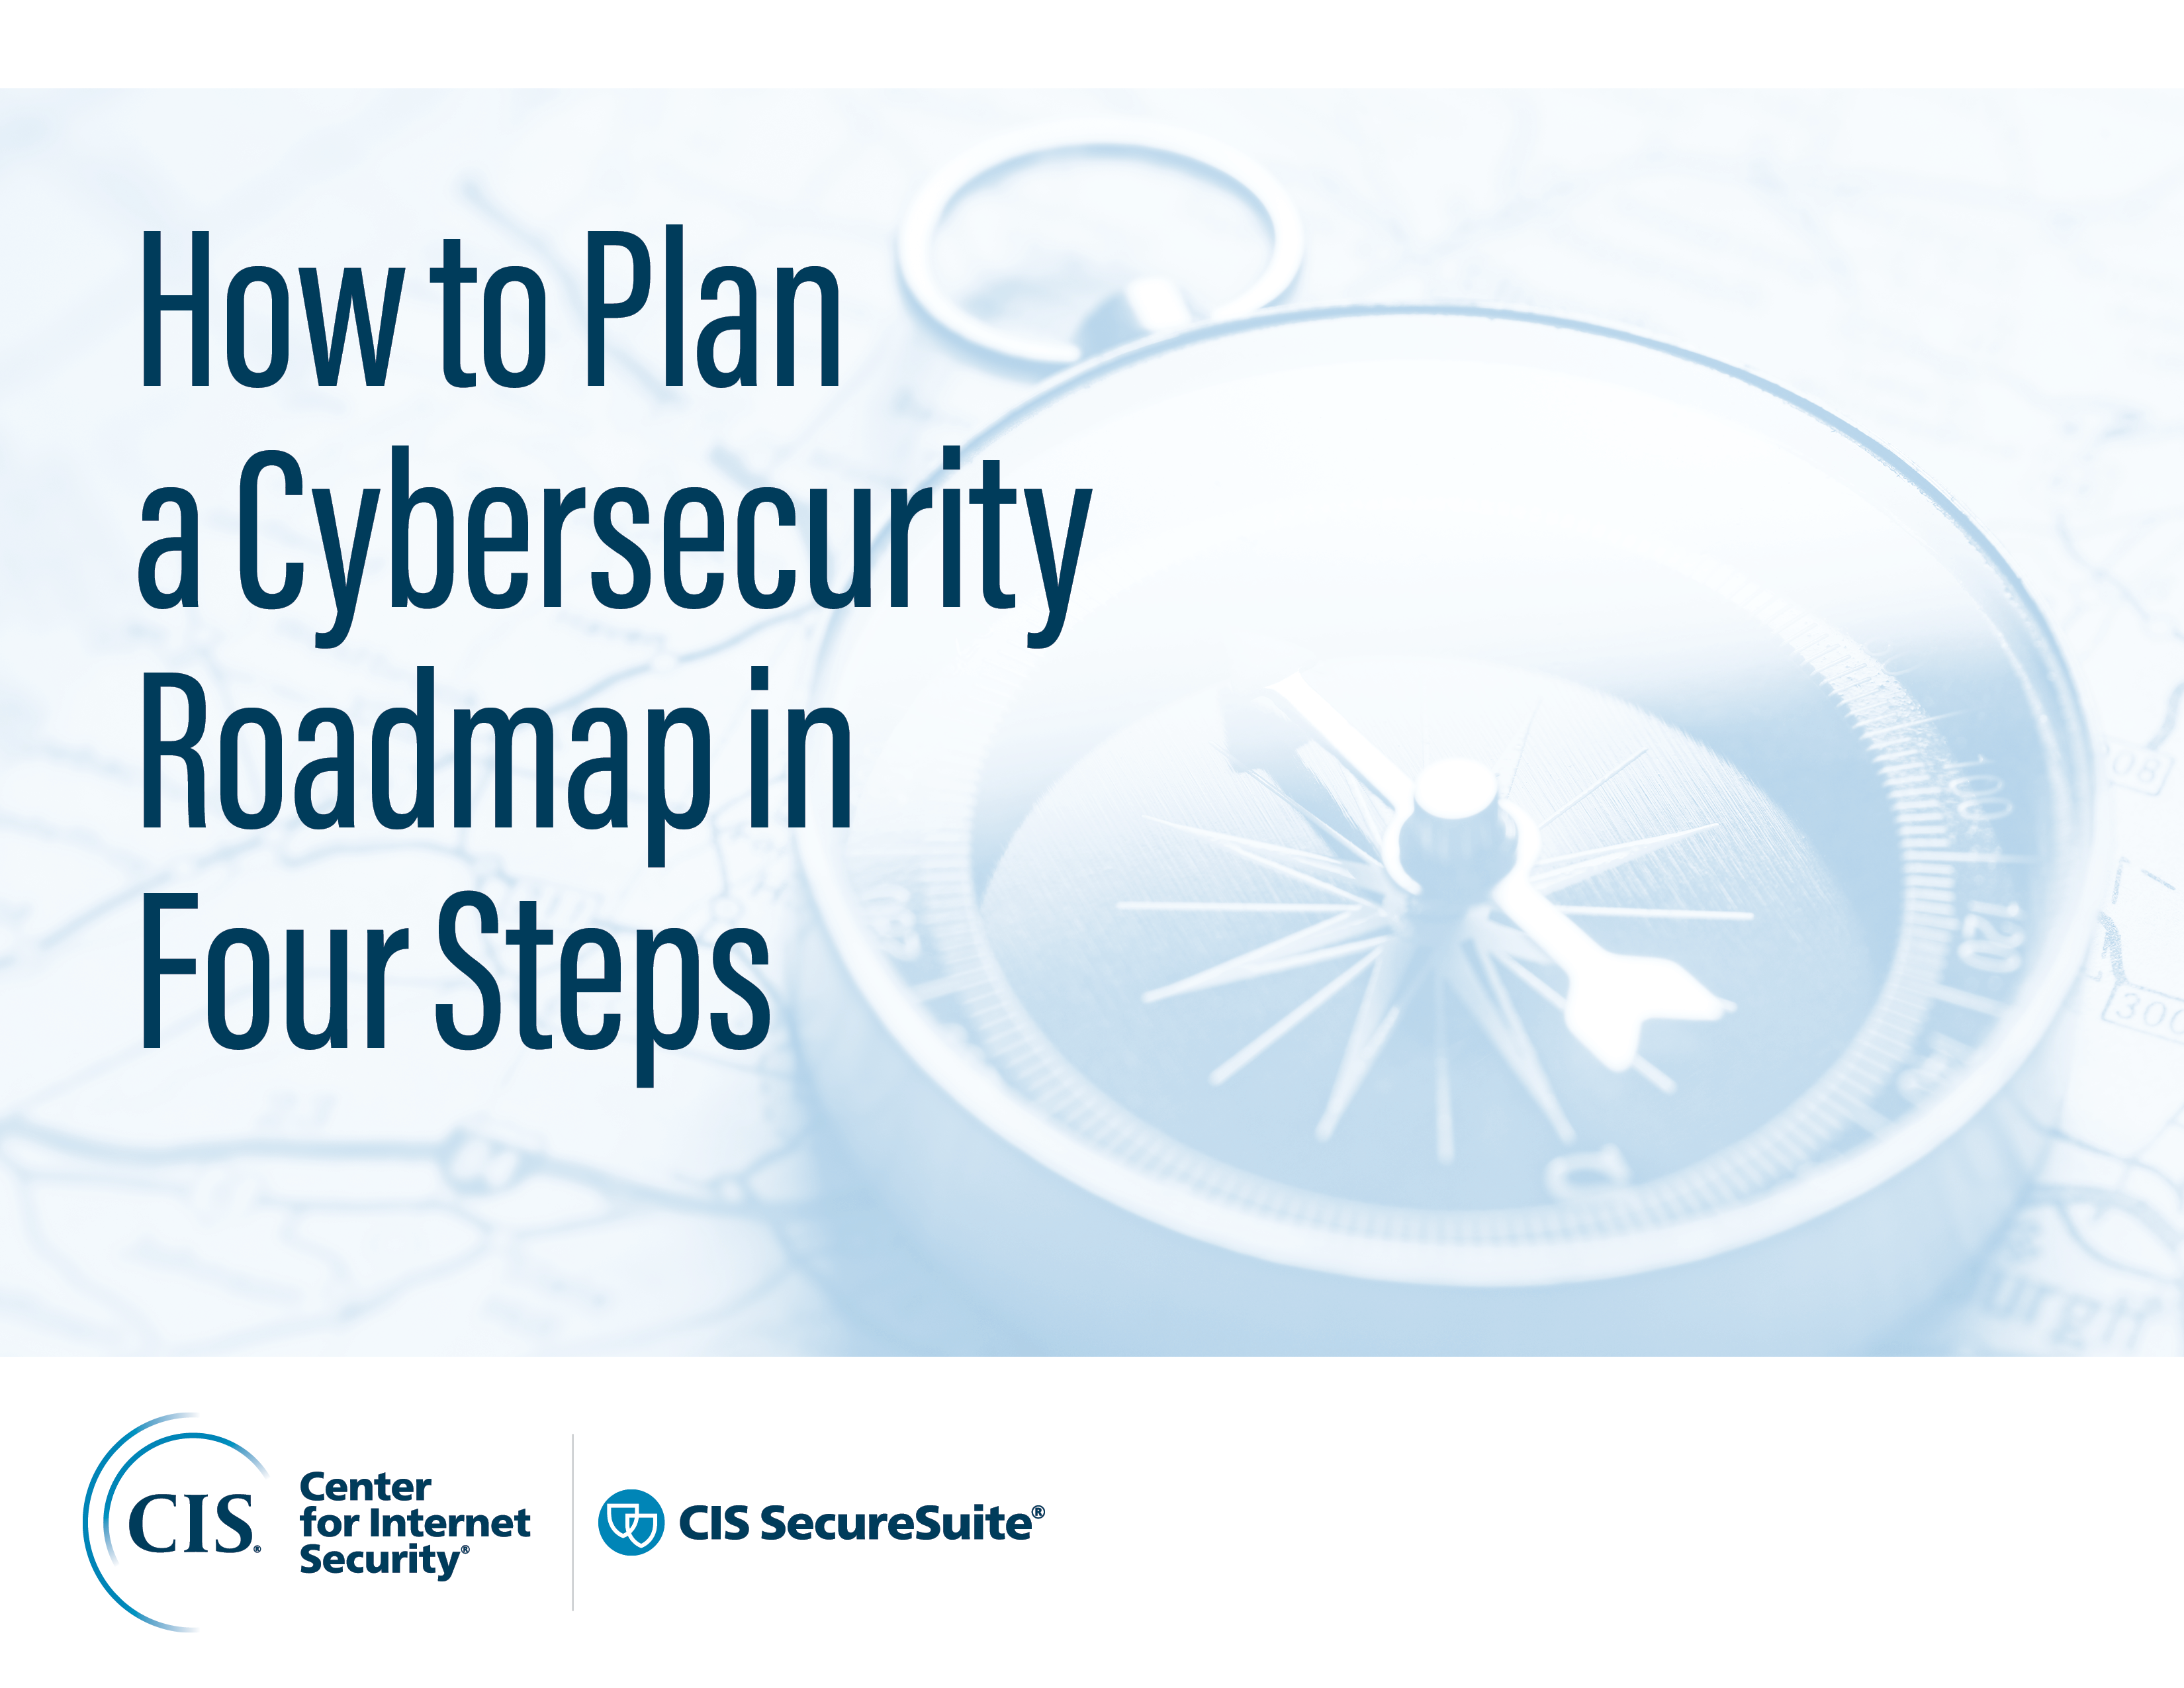 How to Plan a Cybersecurity Roadmap in 4 Steps